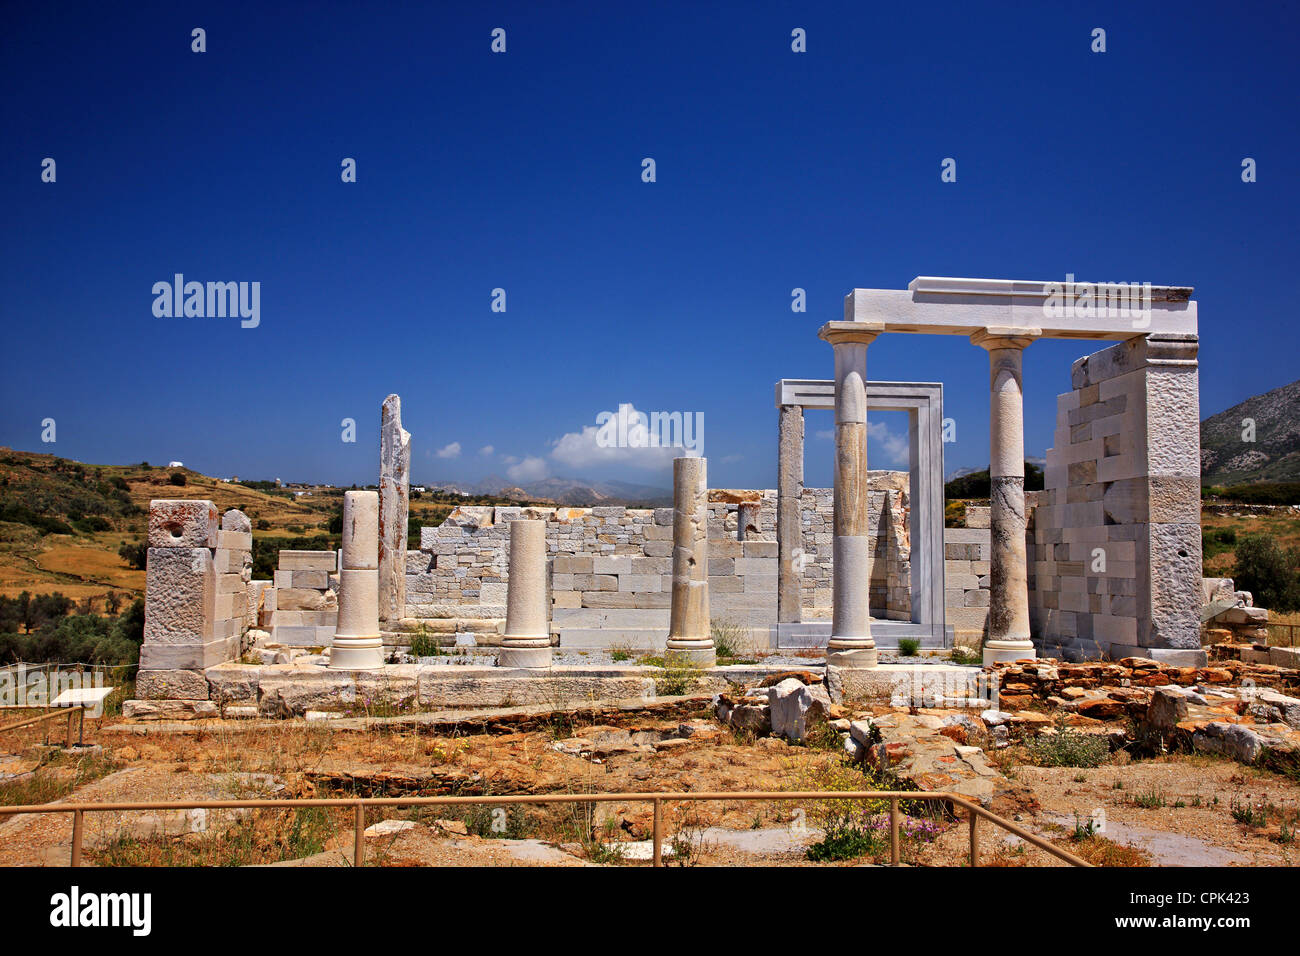 The ancient temple of Demeter (Demetra), goddess of agriculture, close to Sangri village, Naxos island, Cyclades, Greece Stock Photo